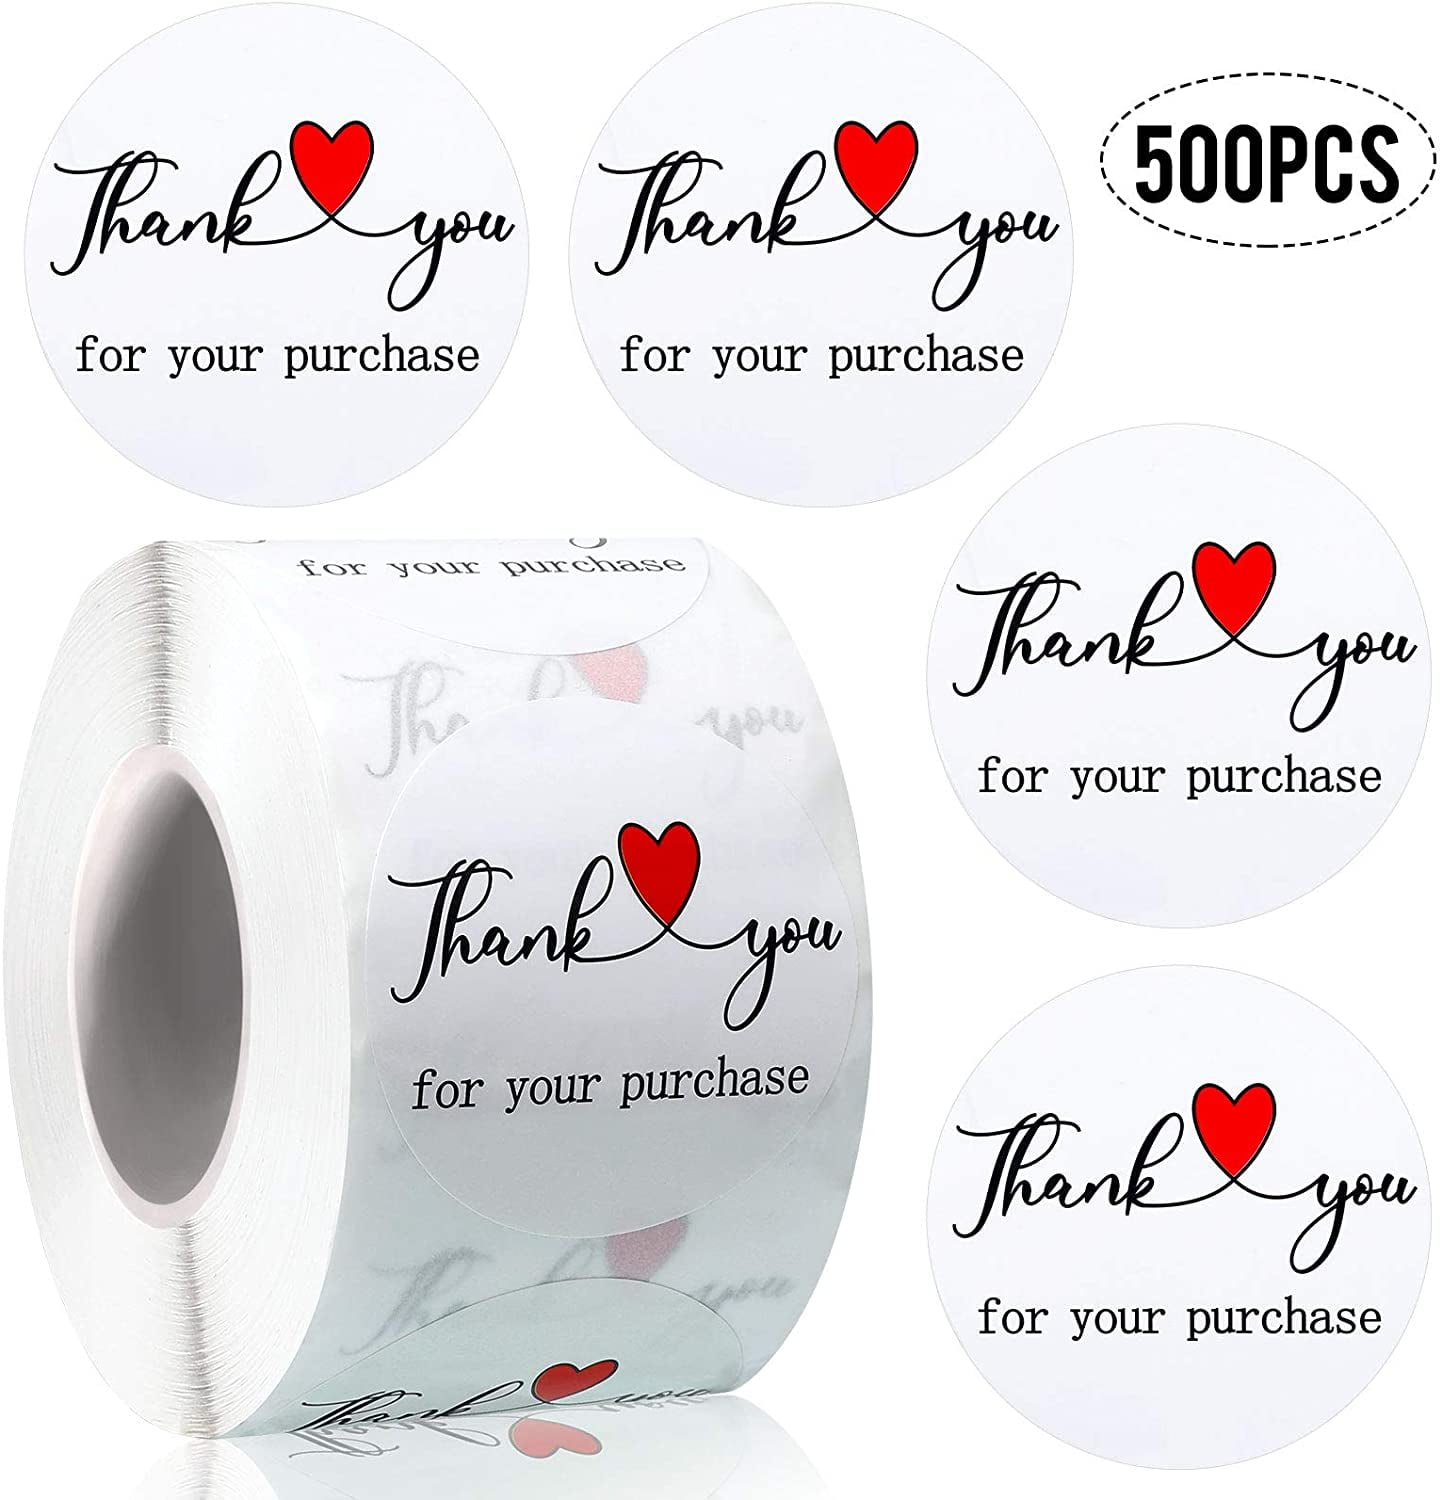 500 THANK YOU LABEL STICKER RED 